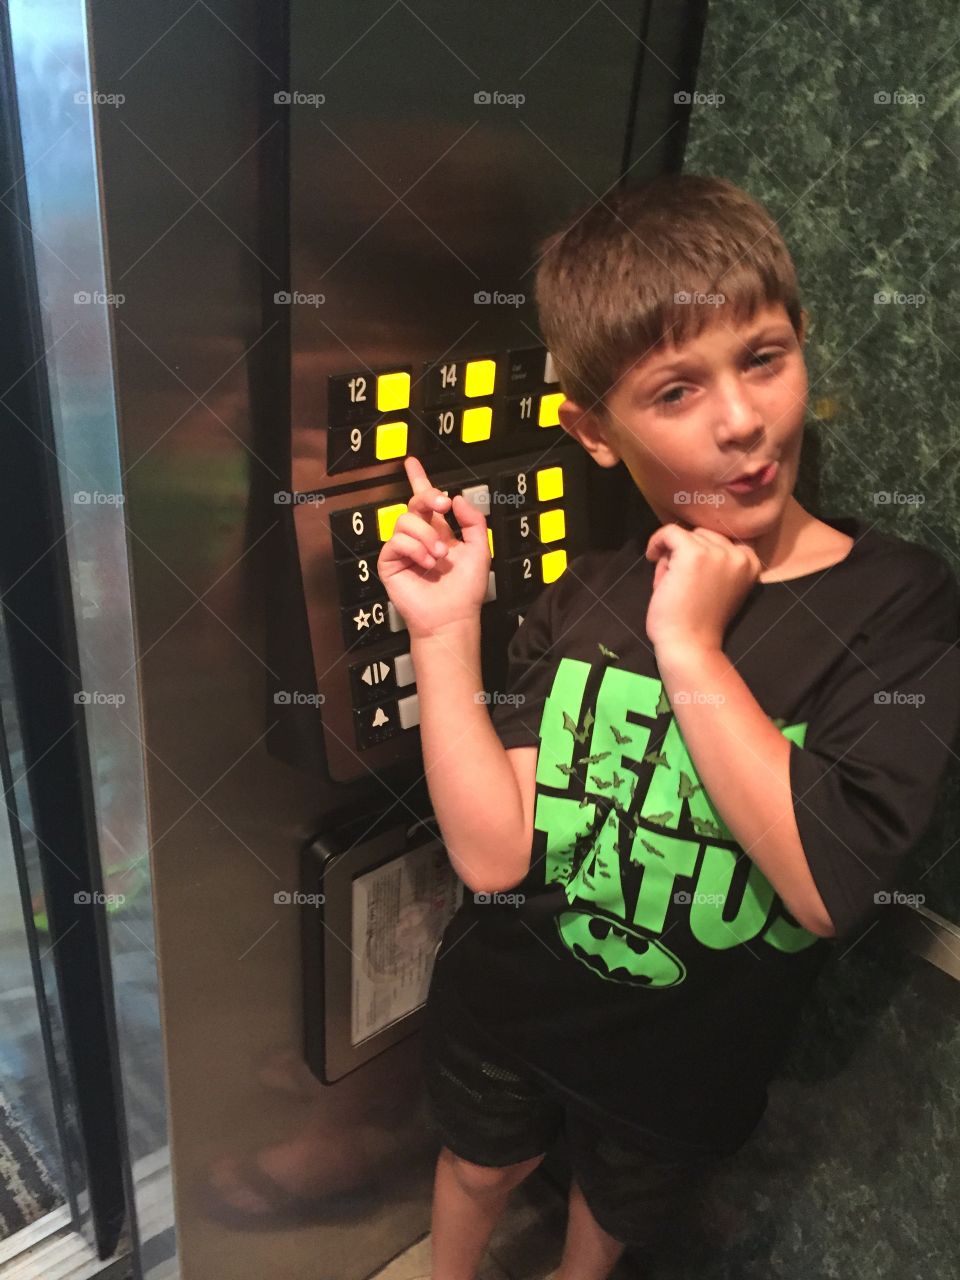 Portrait of little child gesturing towards lift numbers